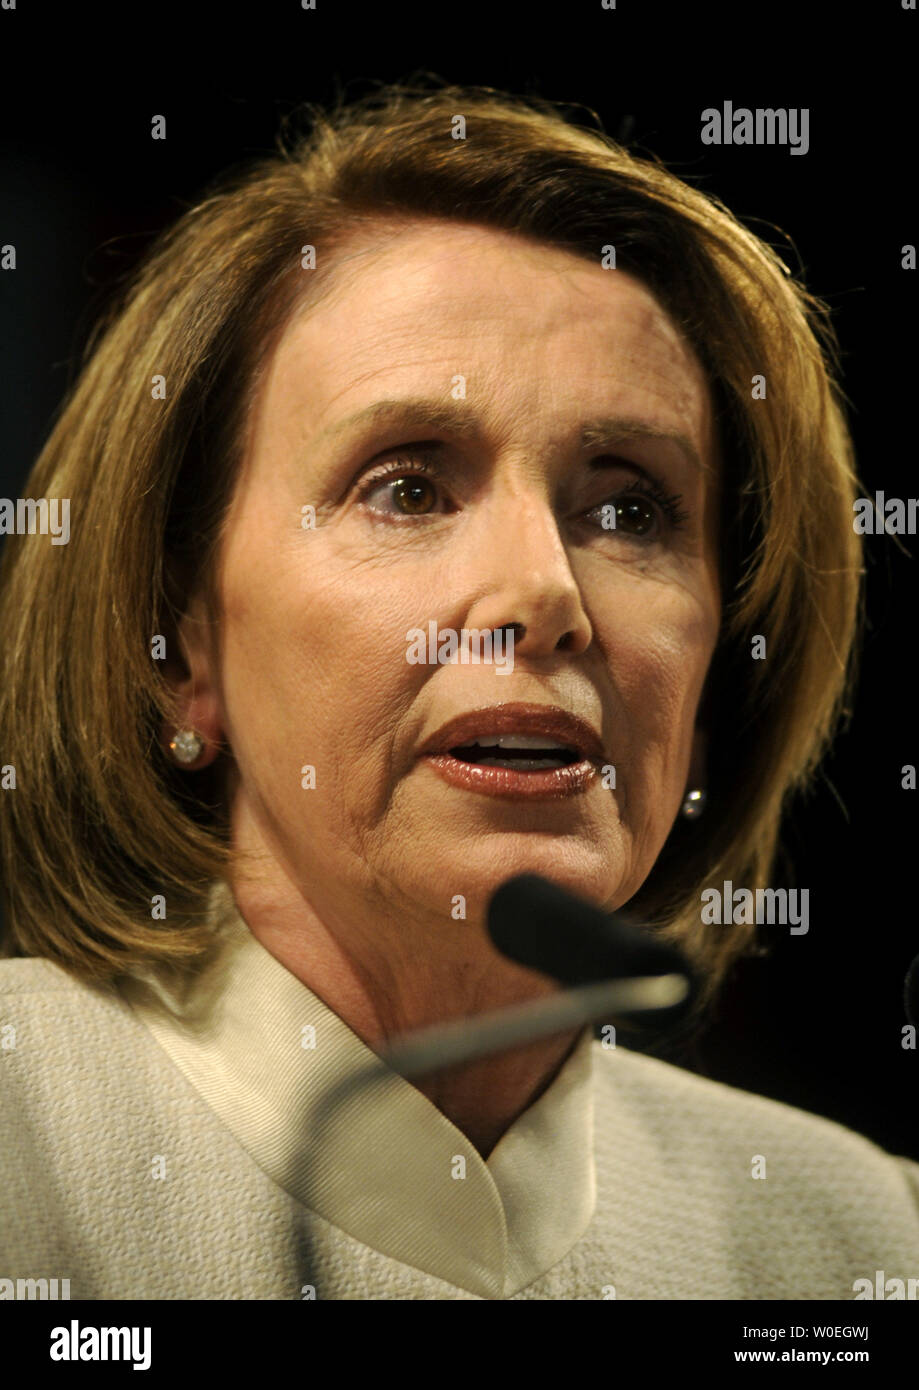 Speaker of the House Nancy Pelosi (D-CA) delivers remarks at a Congresssional Democratic National Committee watch party in Washington on November 4, 2008. (UPI Photo/Kevin Dietsch) Stock Photo